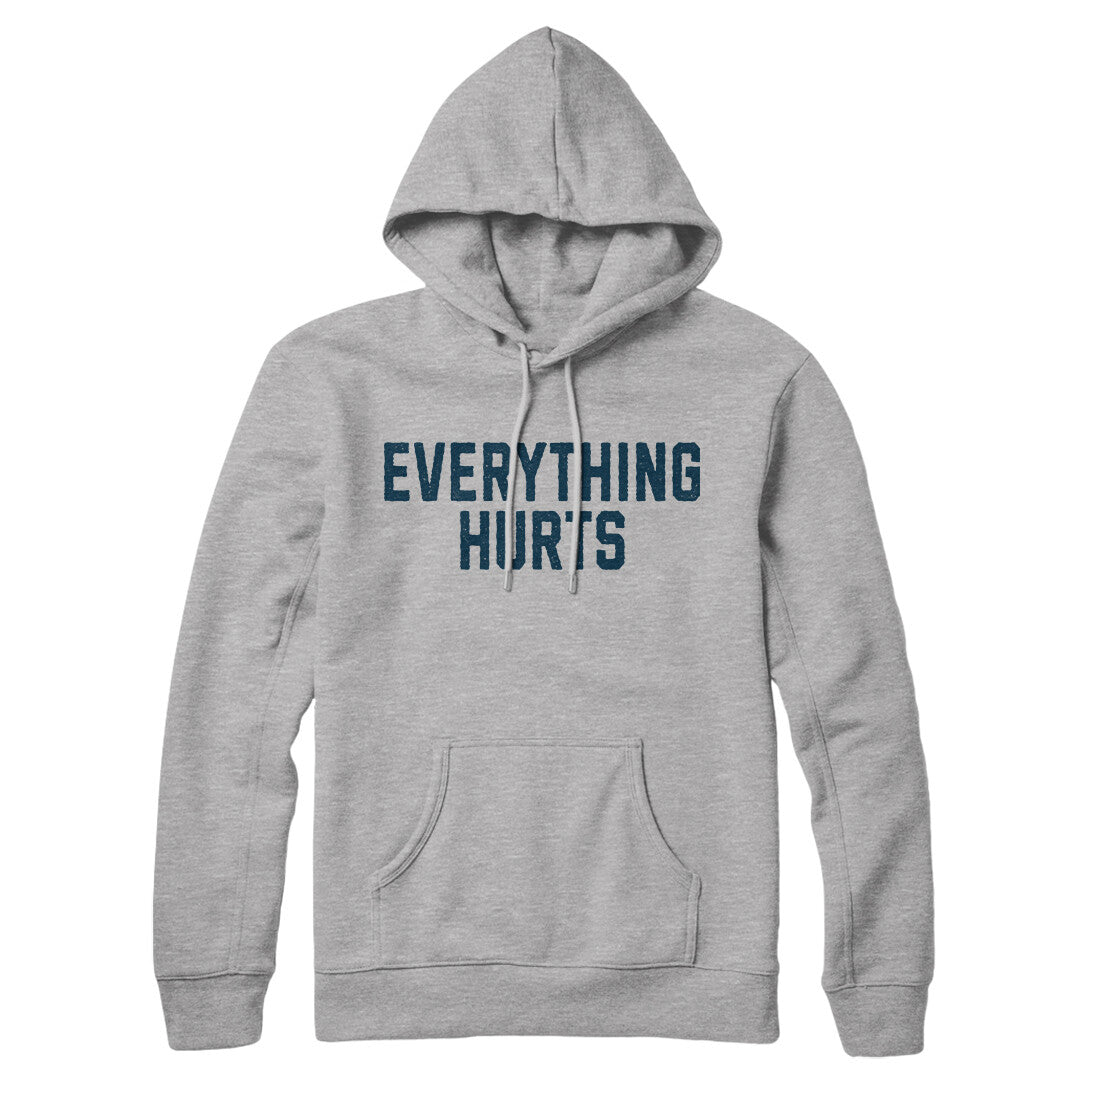 Everything Hurts in Heather Grey Color